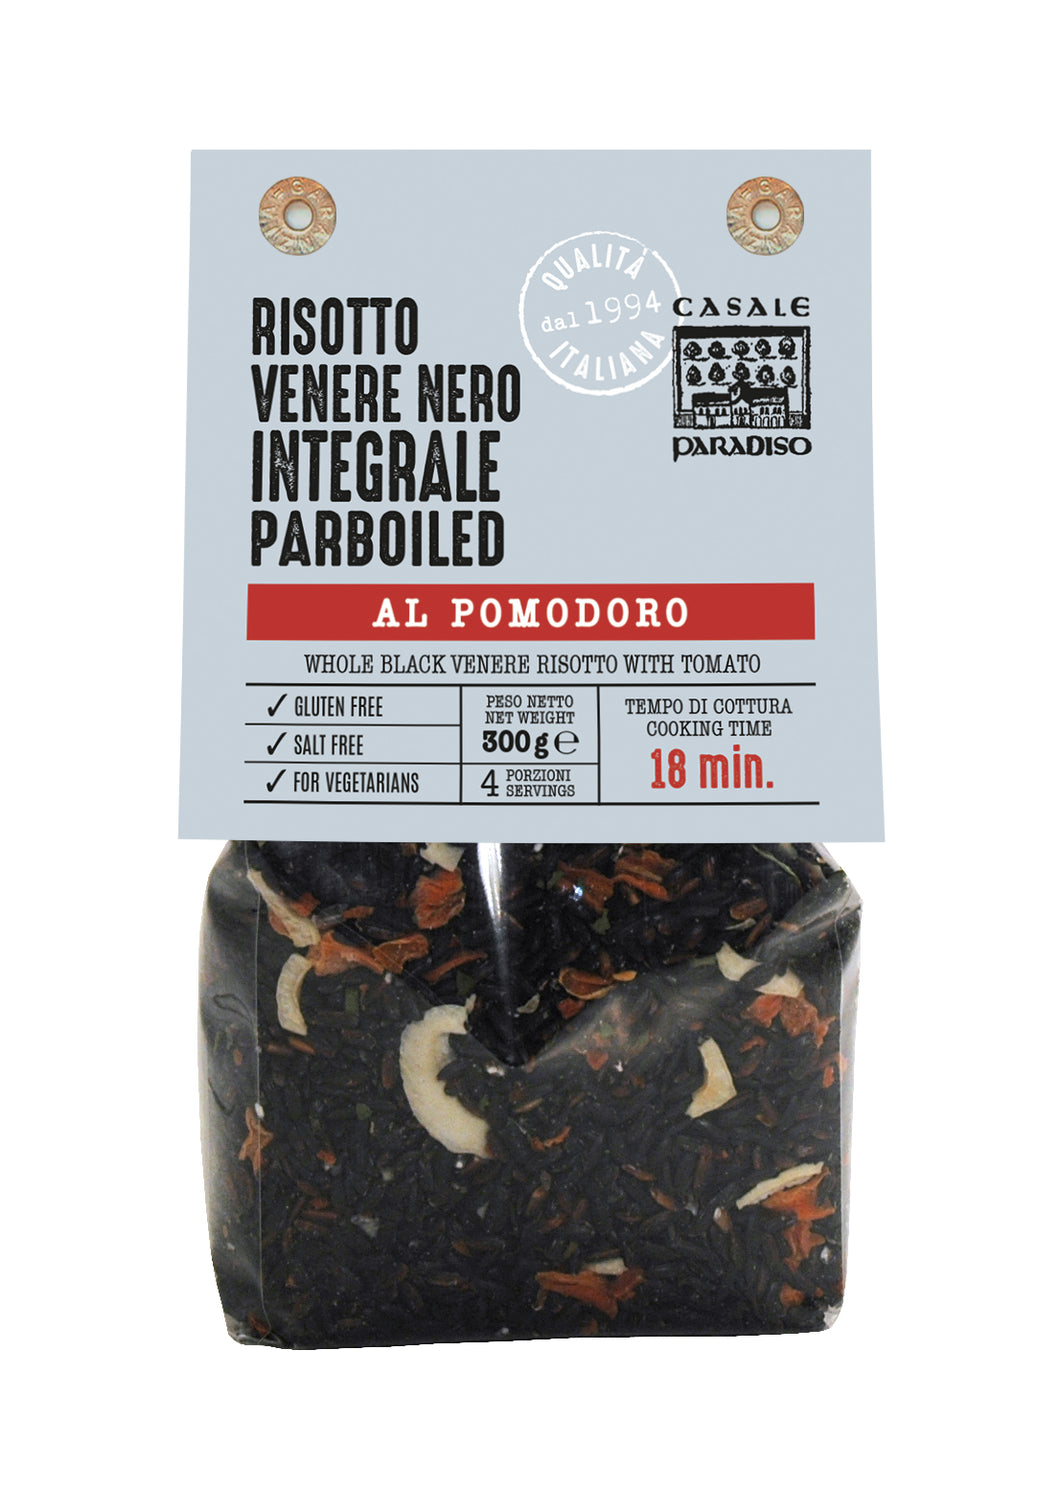 Whole Black Venere Risotto with Tomatoes, By Casale Paradiso 10.58 oz